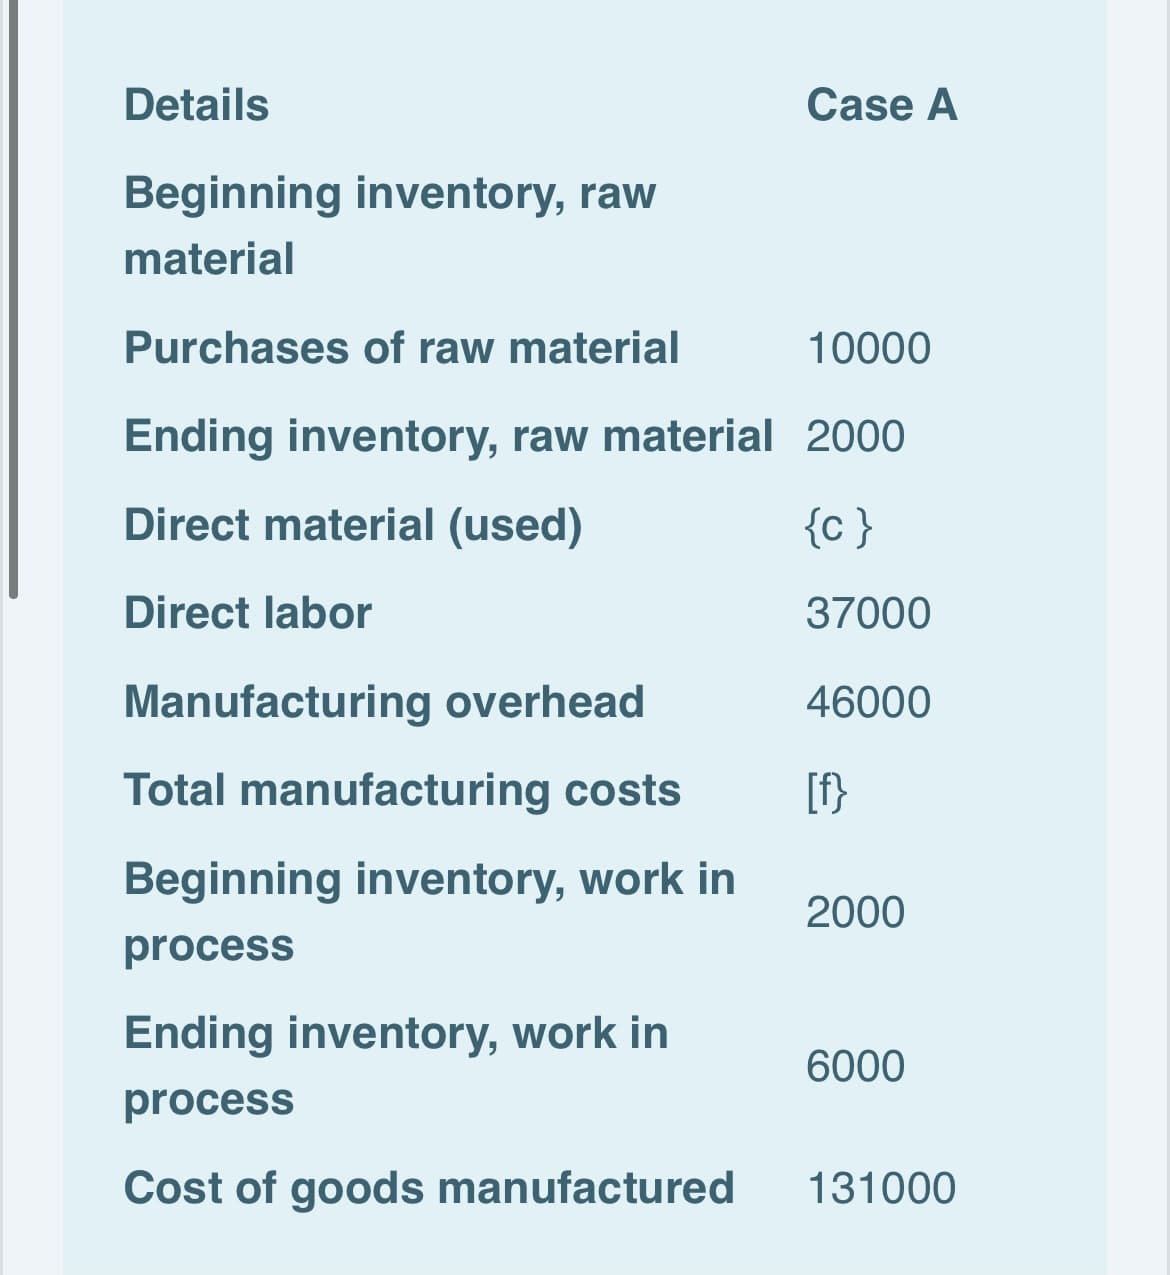 Details
Case A
Beginning inventory, raw
material
Purchases of raw material
10000
Ending inventory, raw material 2000
Direct material (used)
{c}
Direct labor
37000
Manufacturing overhead
46000
Total manufacturing costs
[f}
Beginning inventory, work in
2000
process
Ending inventory, work in
6000
process
Cost of goods manufactured
131000
